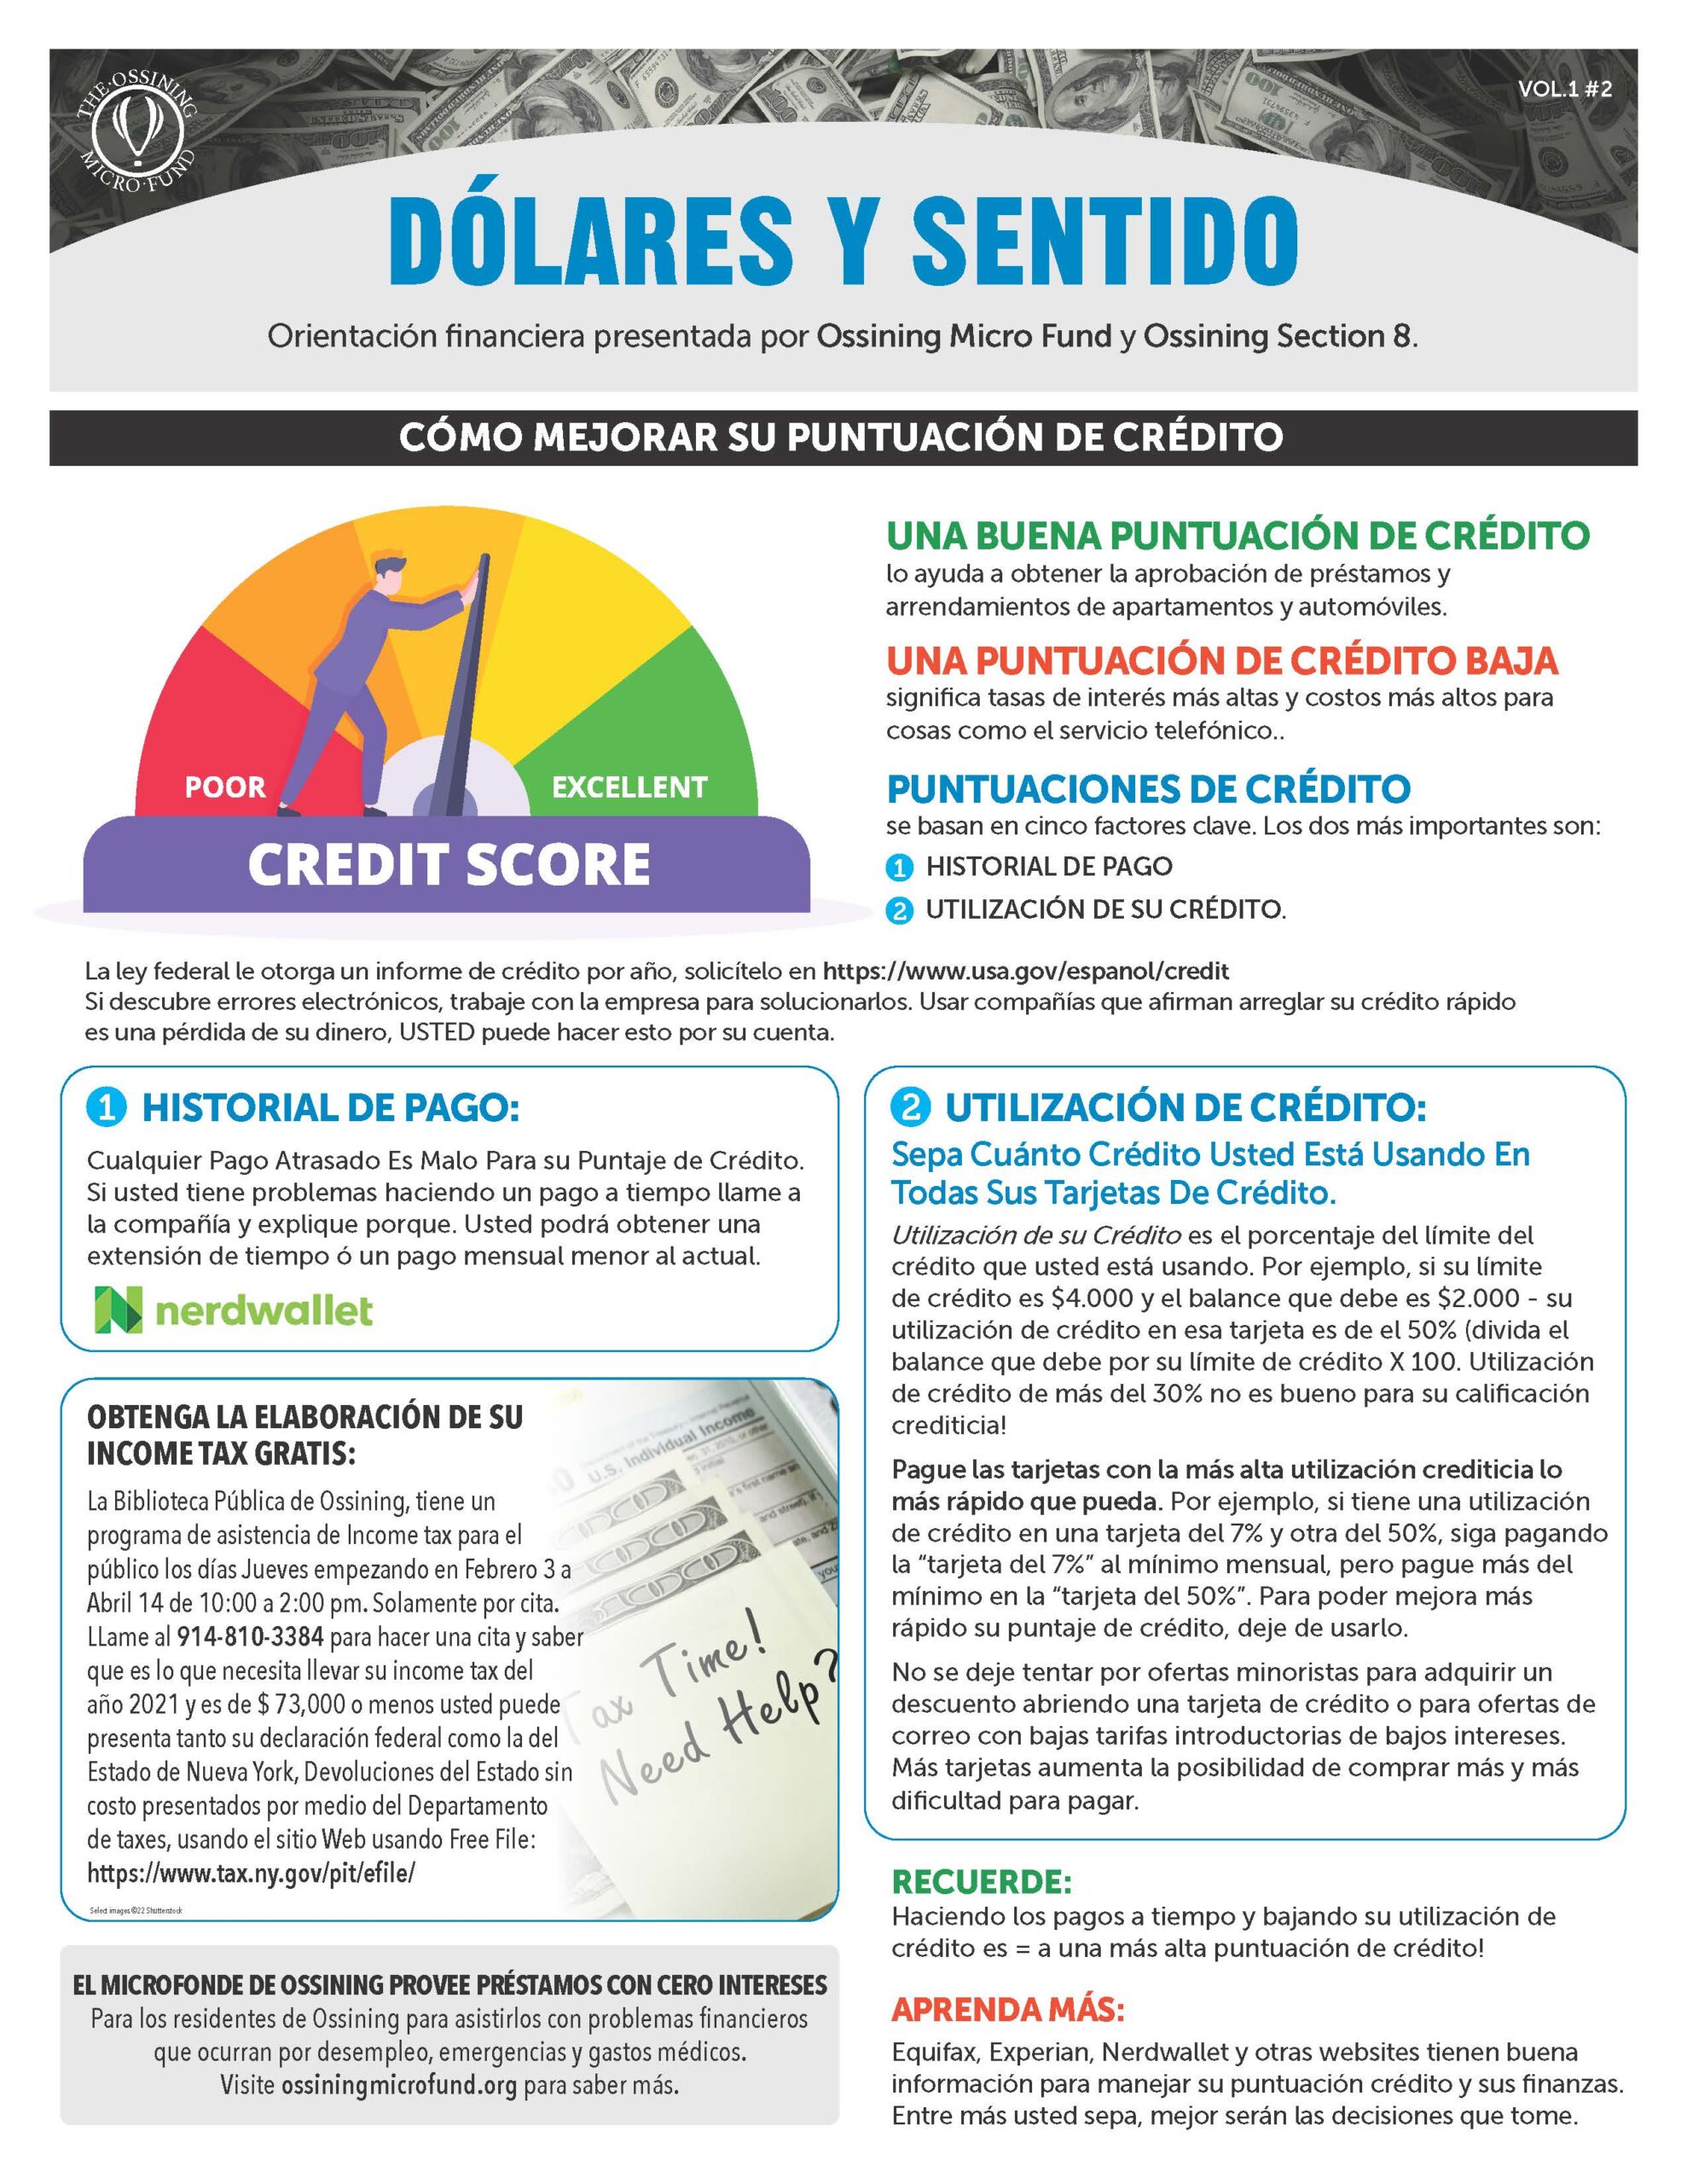 OMF Bulletin Vol1 Issue2 on Credit Scores (1)_Page_2